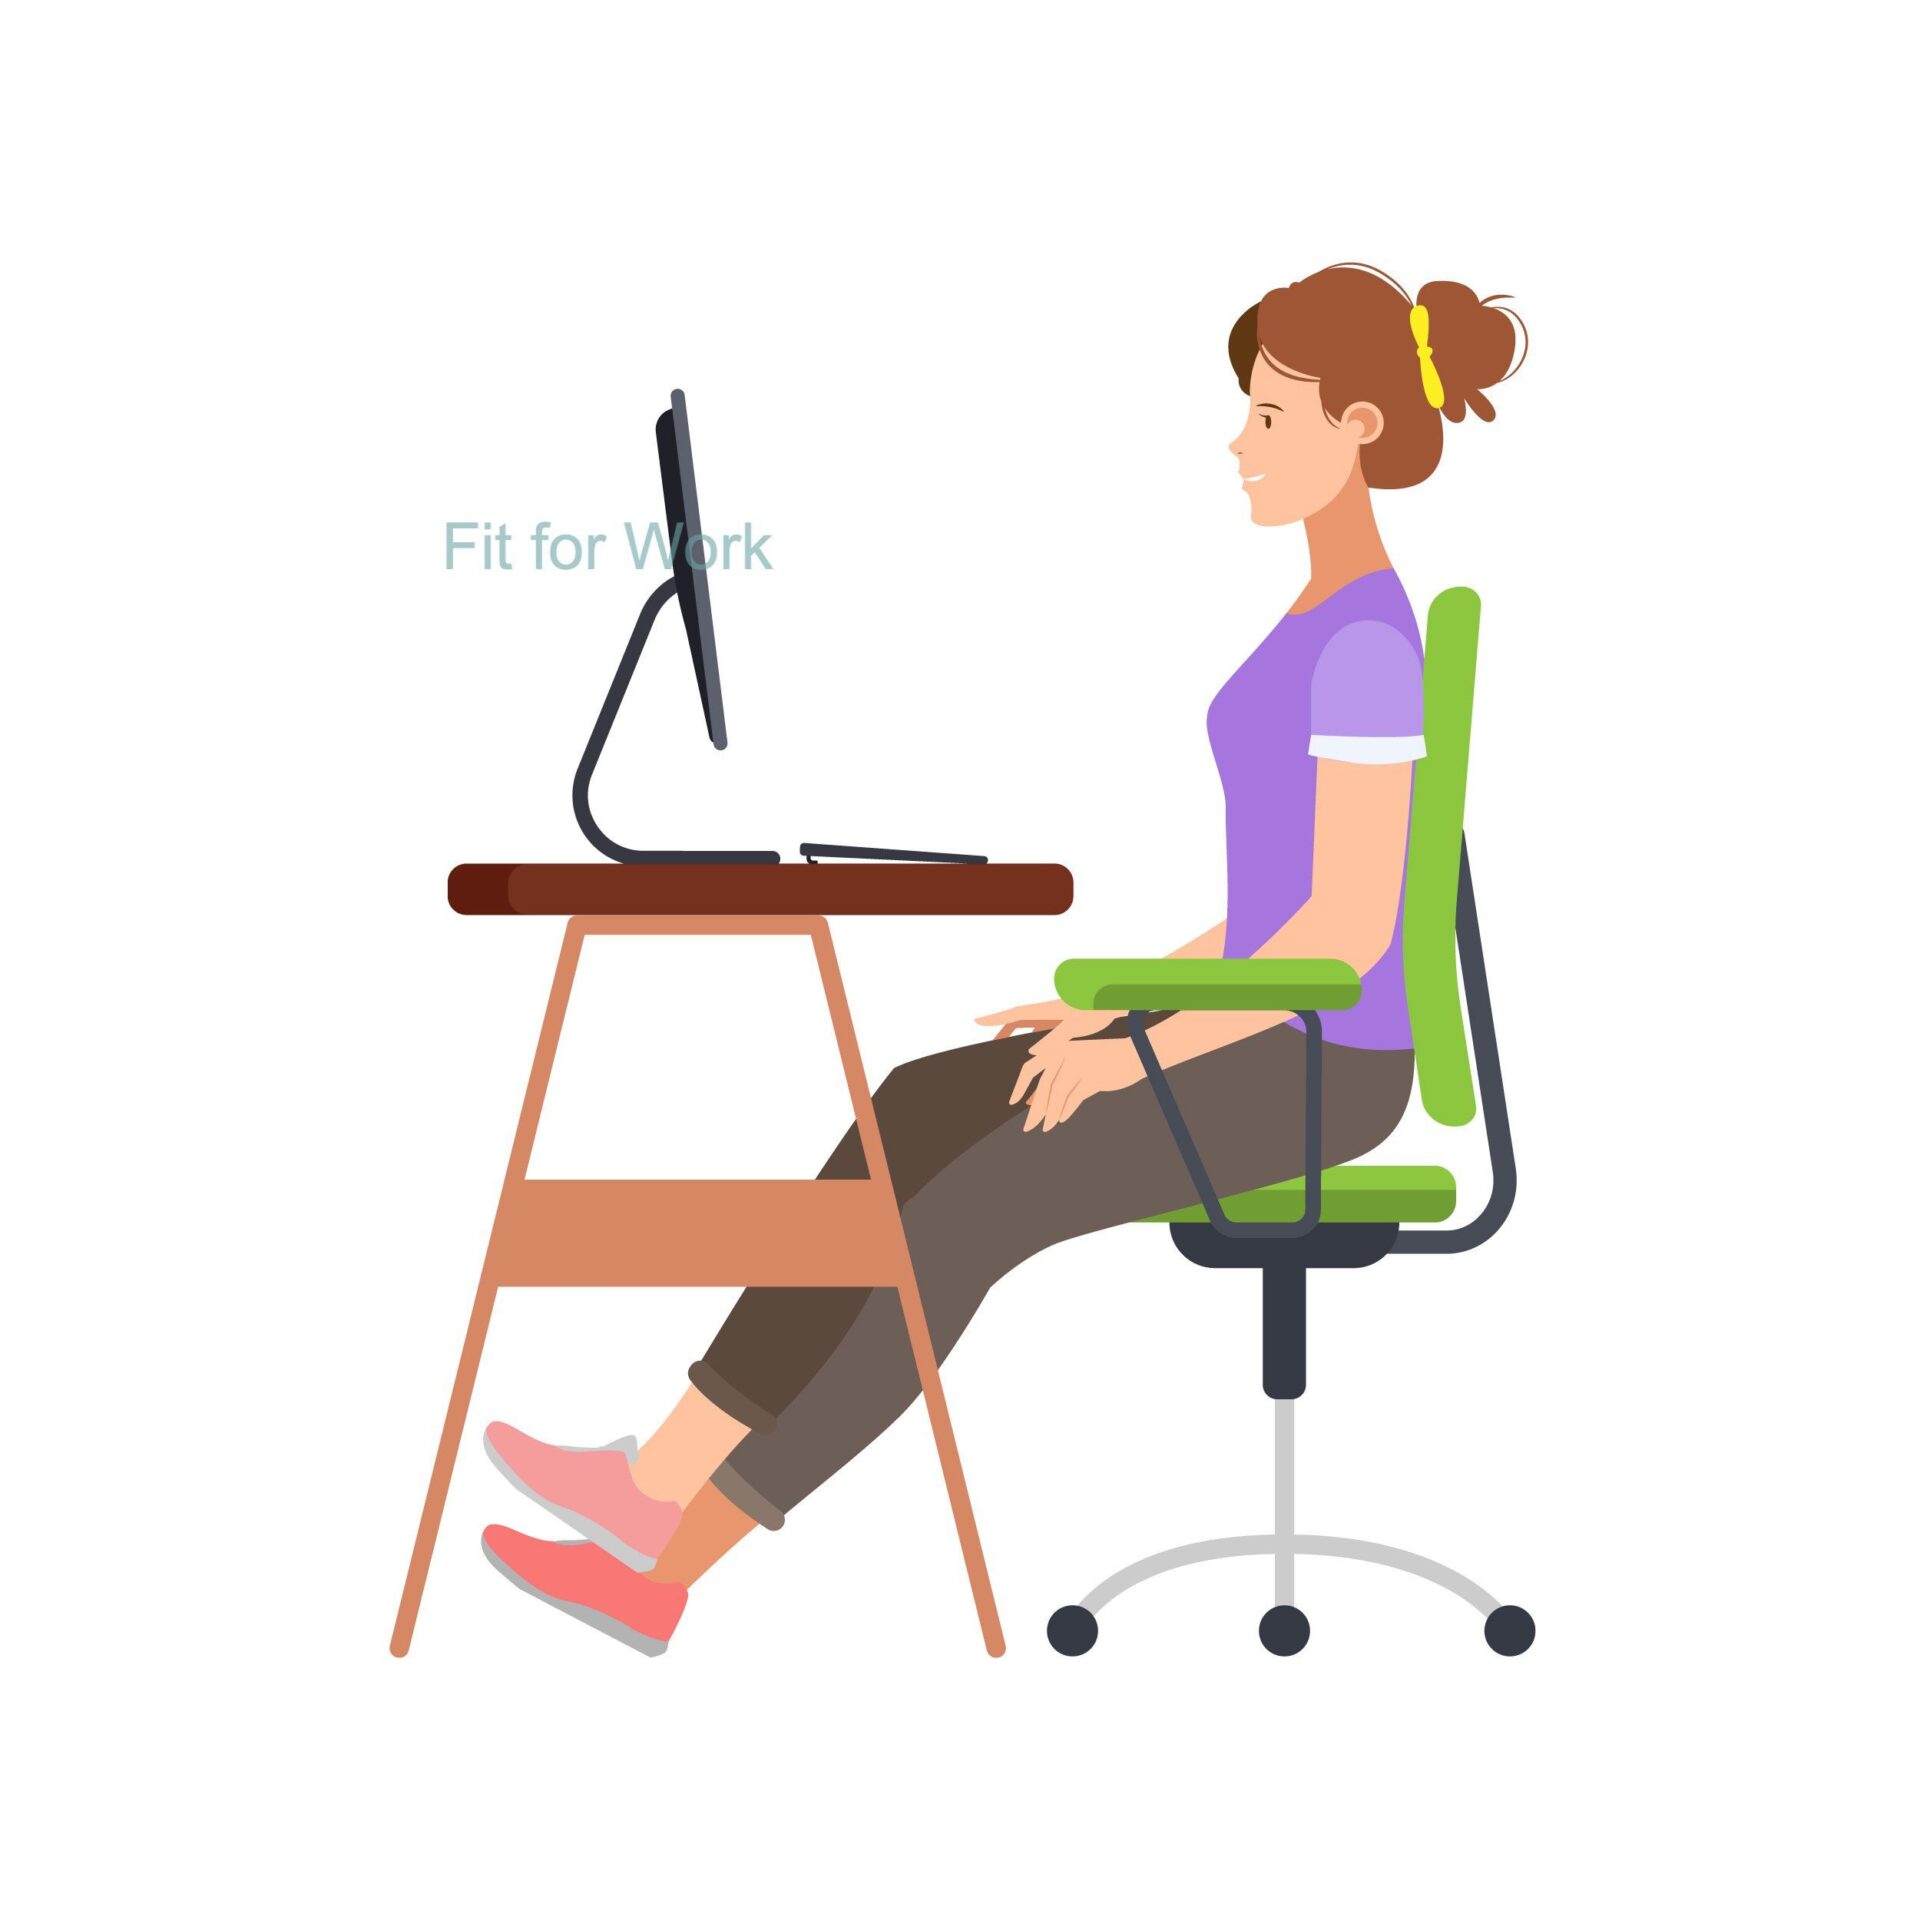 ARE YOU SITTING AT YOUR DESK CORRECTLY?